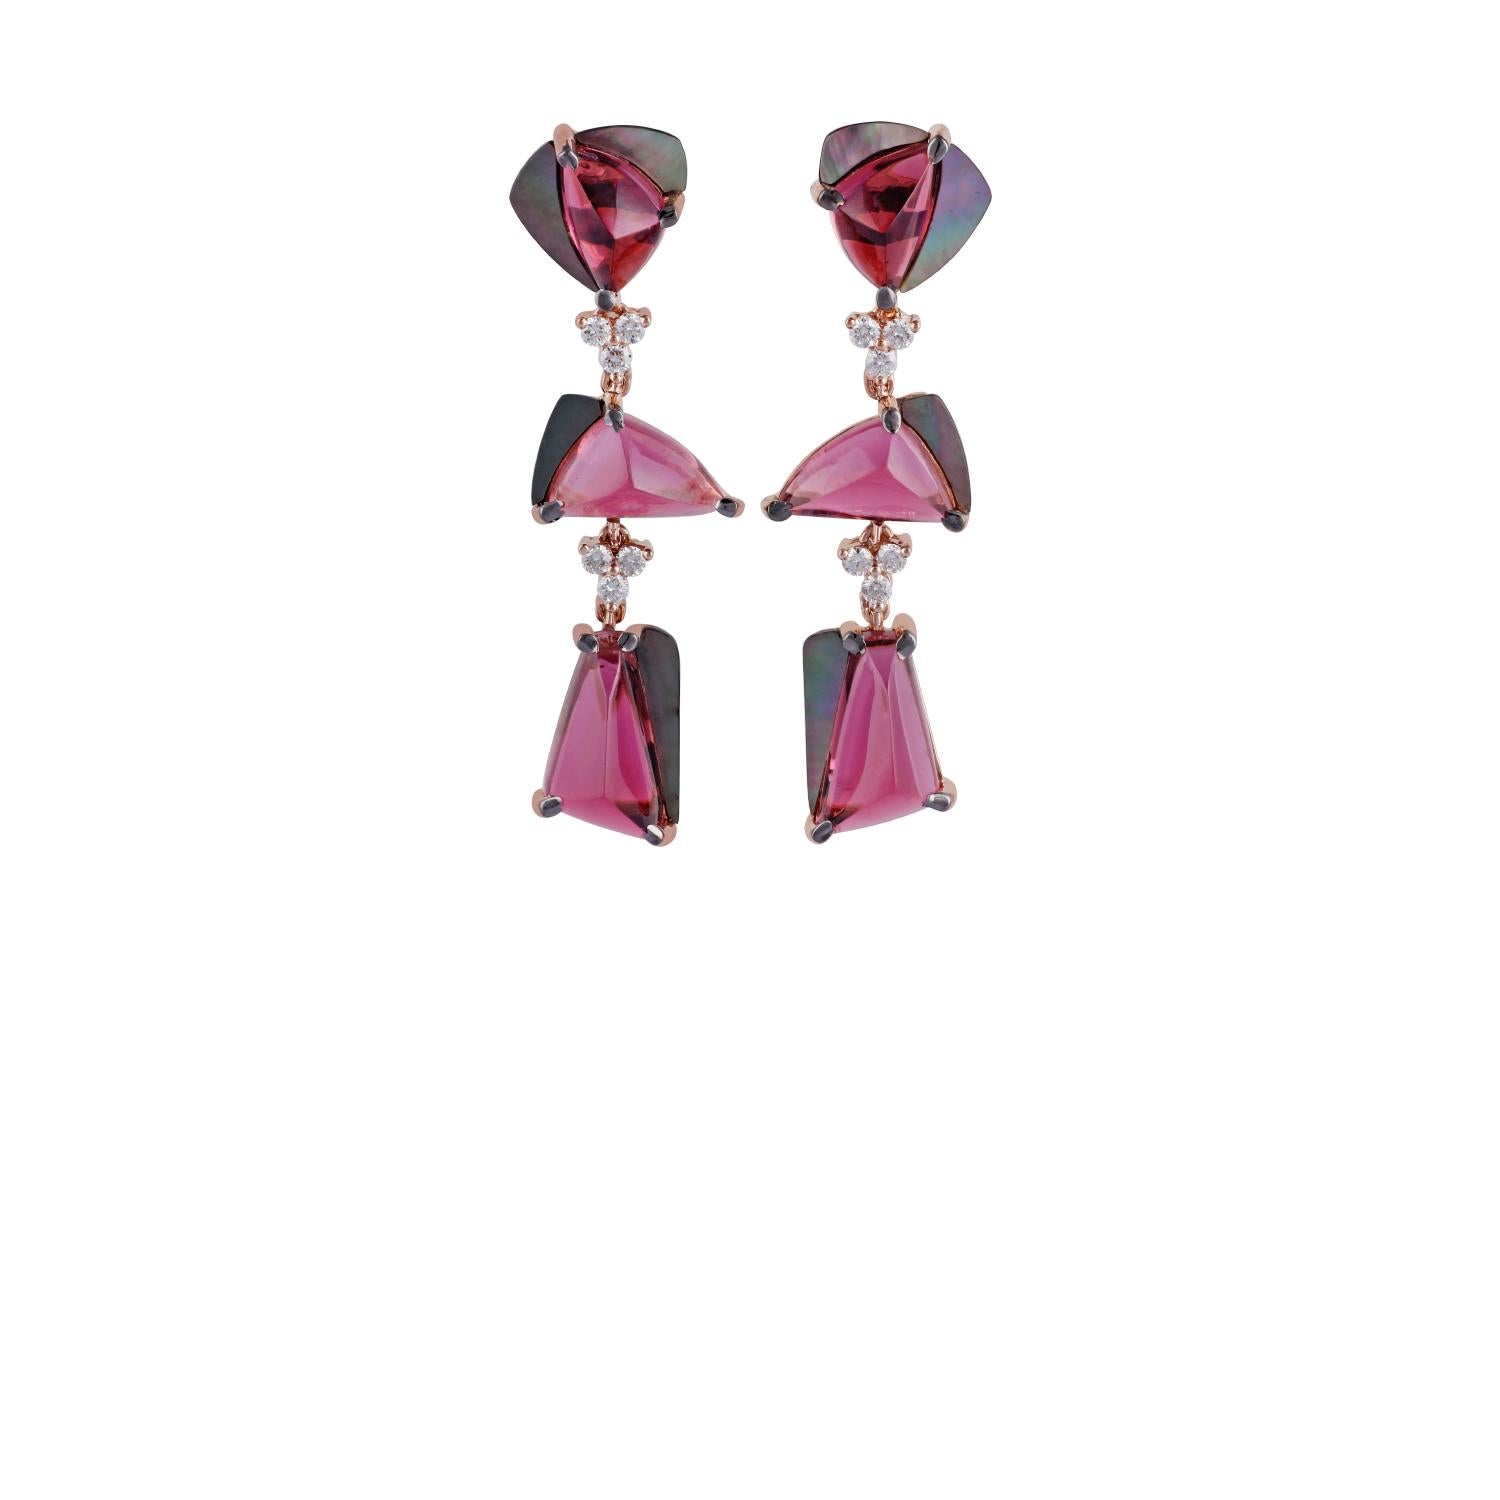 This is an exclusive pair of earrings studded in 18k rose gold features tourmaline weight 20.23 carats with mother of pearl weight 1.61 carats & diamonds weight 0.41 carat, these earrings entirely made of 18k rose gold weight 7.98 grams, earrings